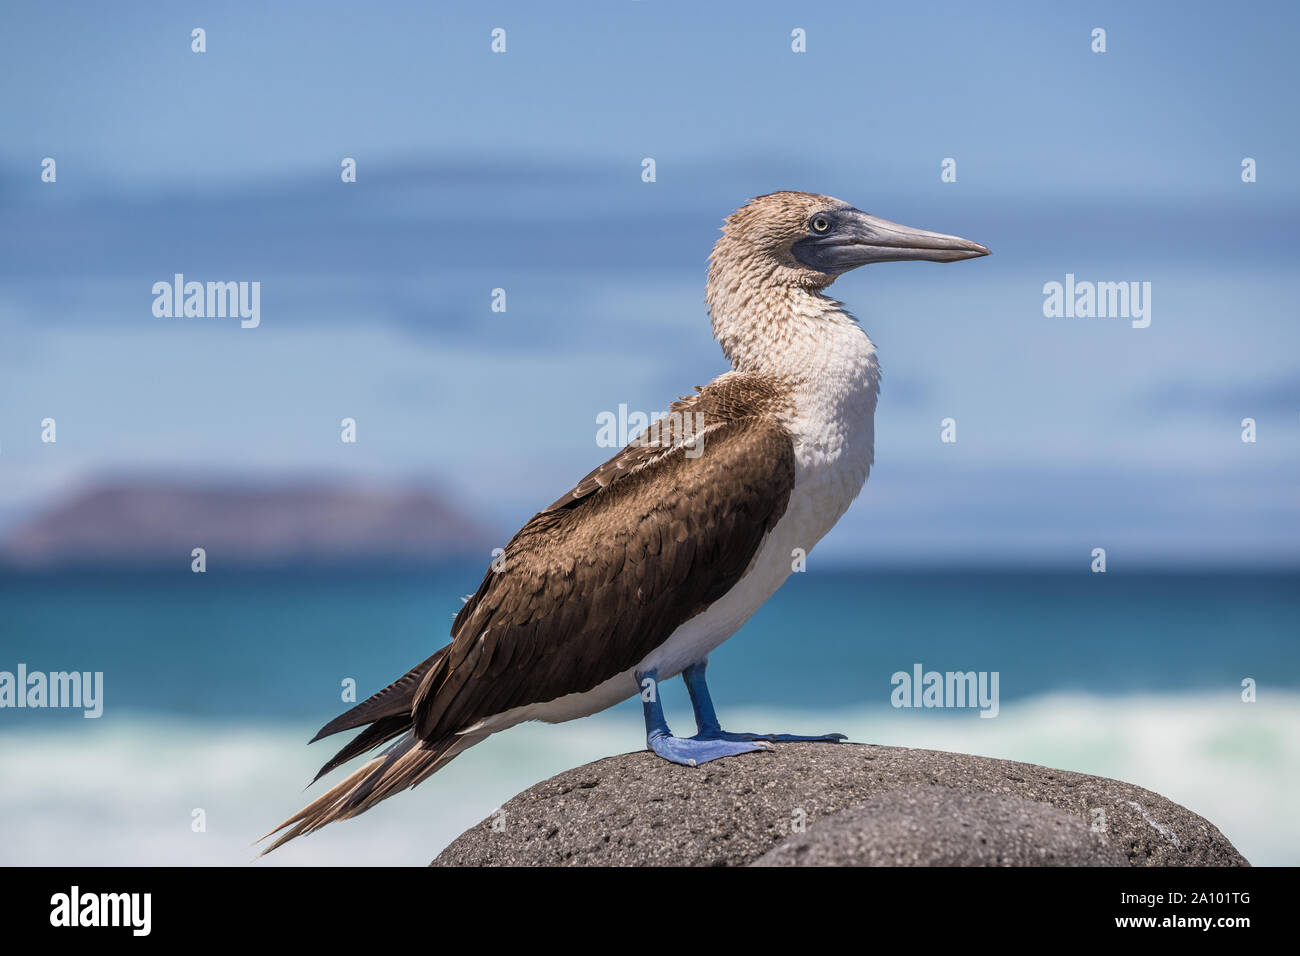 Galapagos Blue footed Booby - Iconic and famous galapagos animals and wildlife. Blue-footed boobies are native to the Galapagos Islands, Ecuador, South America. Stock Photo